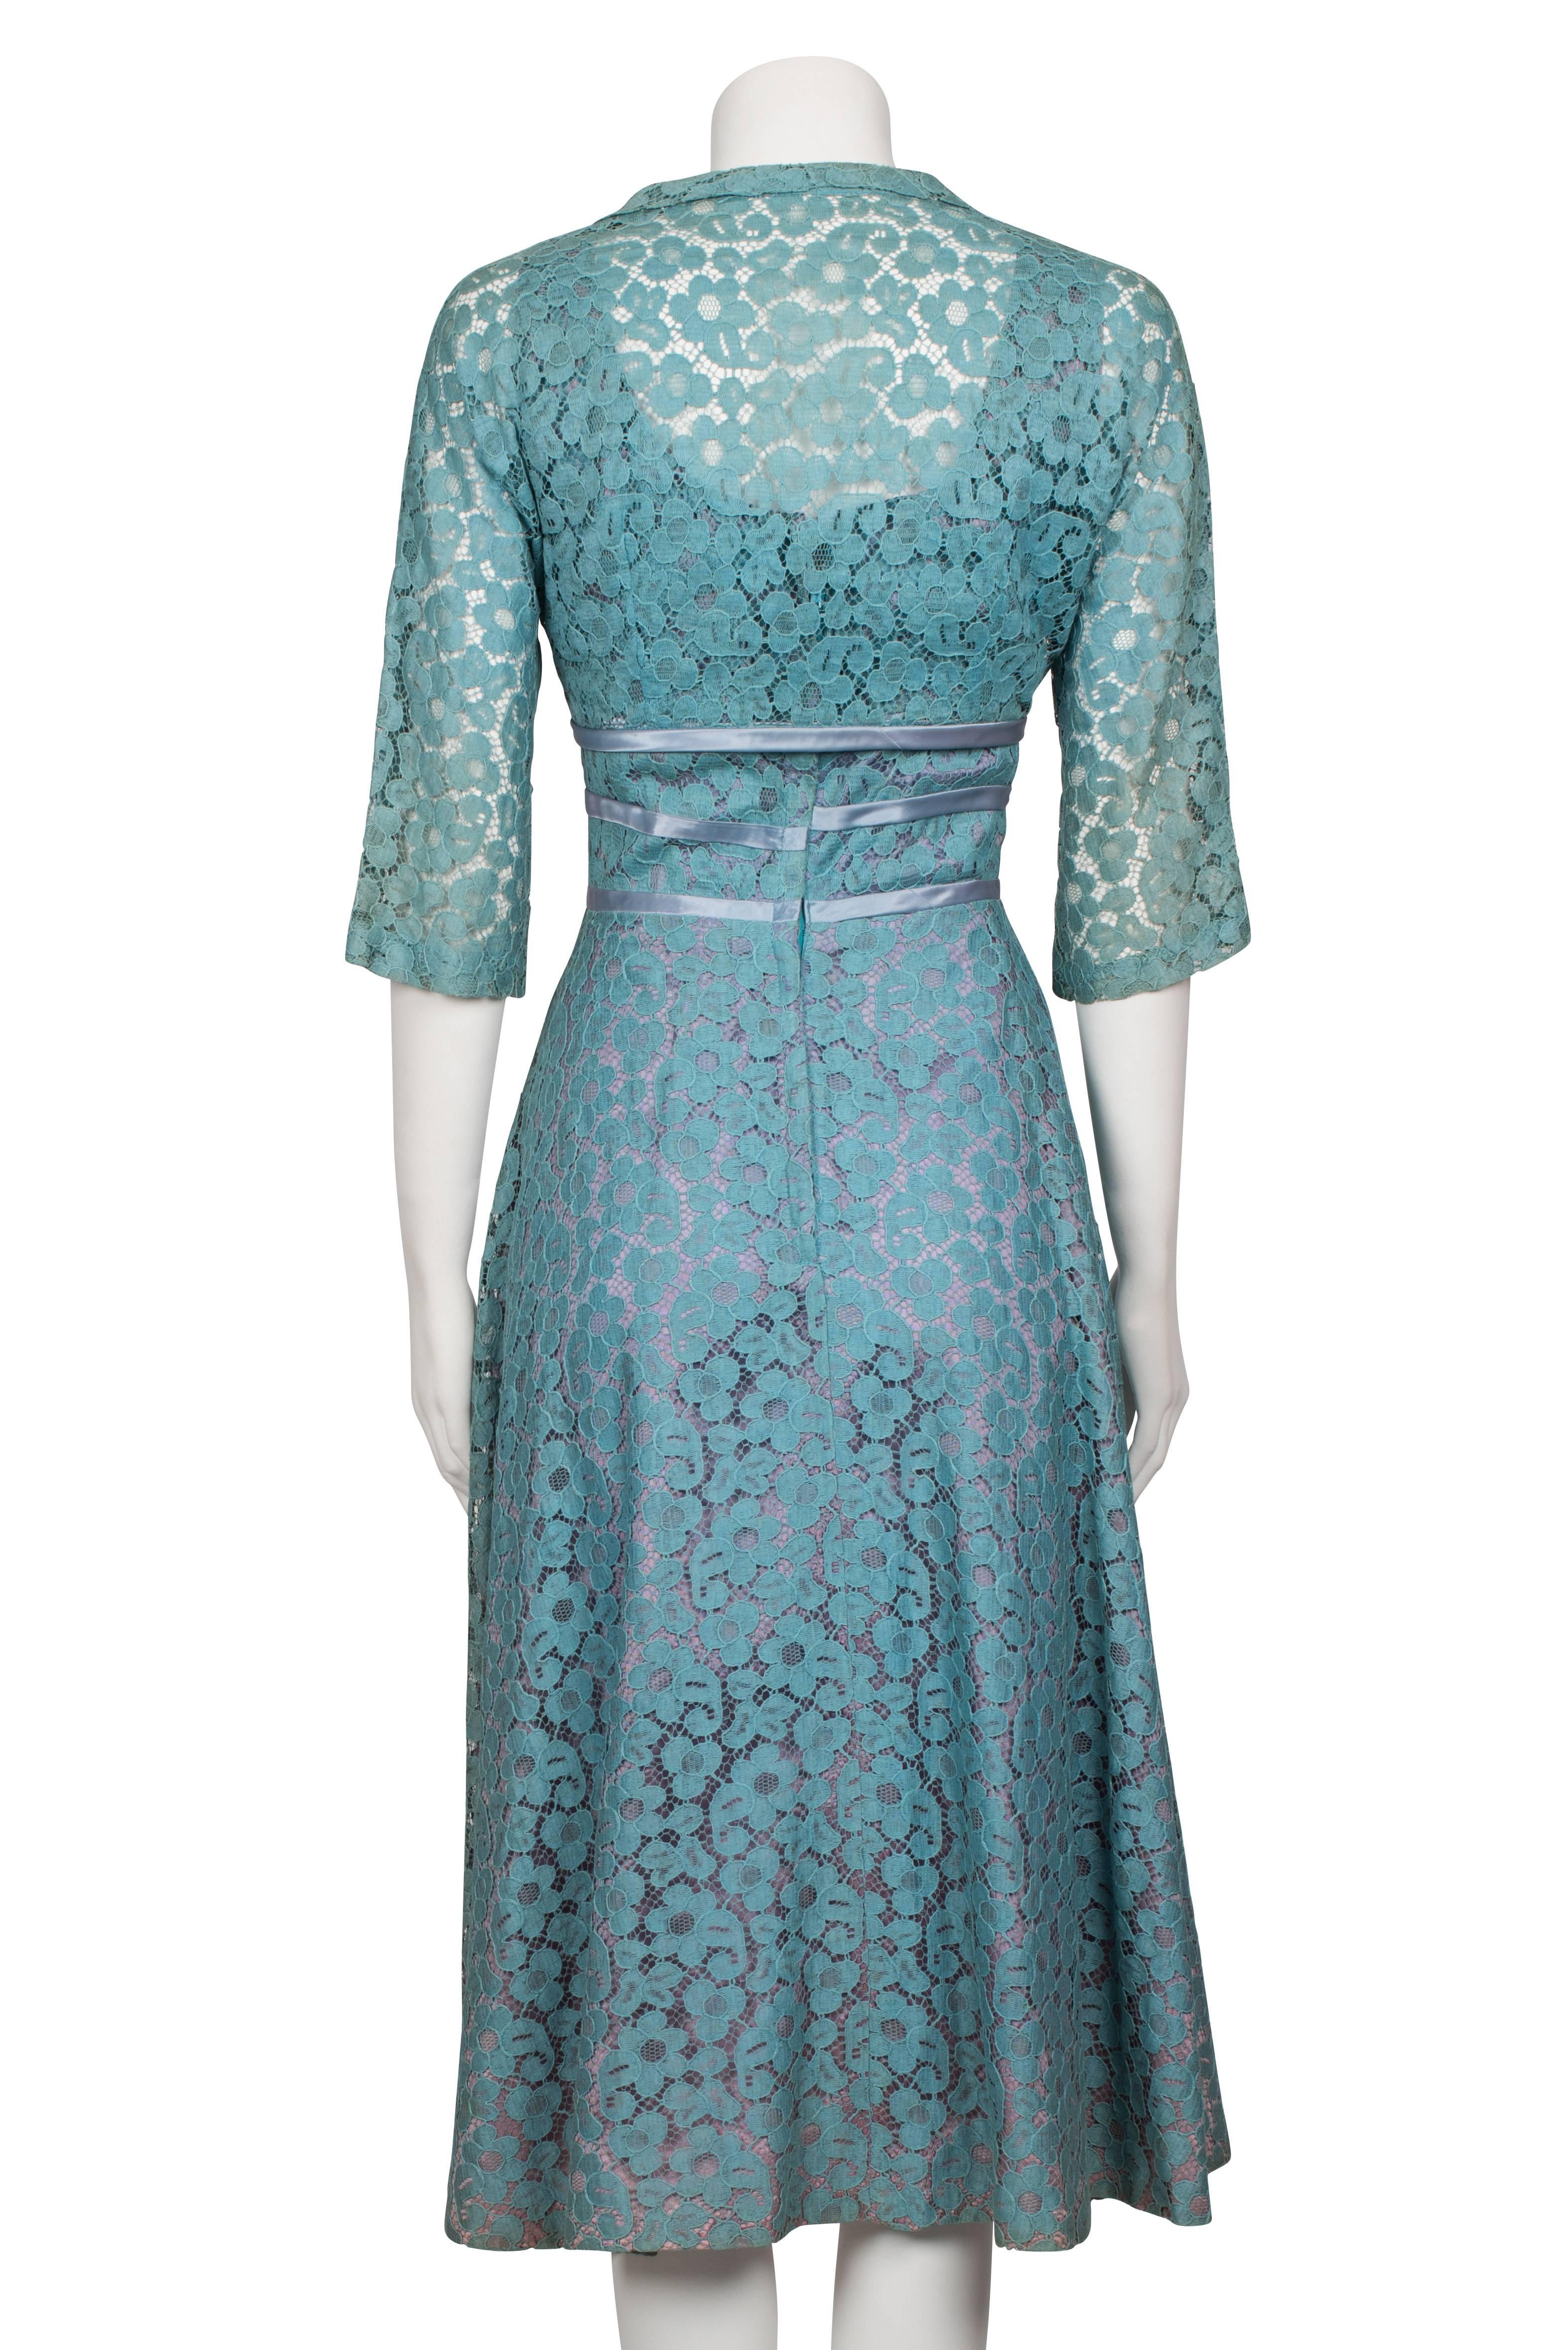 Women's 1950s Turquoise Lace and Trim Lilac Satin Trim Dress and Bolero For Sale